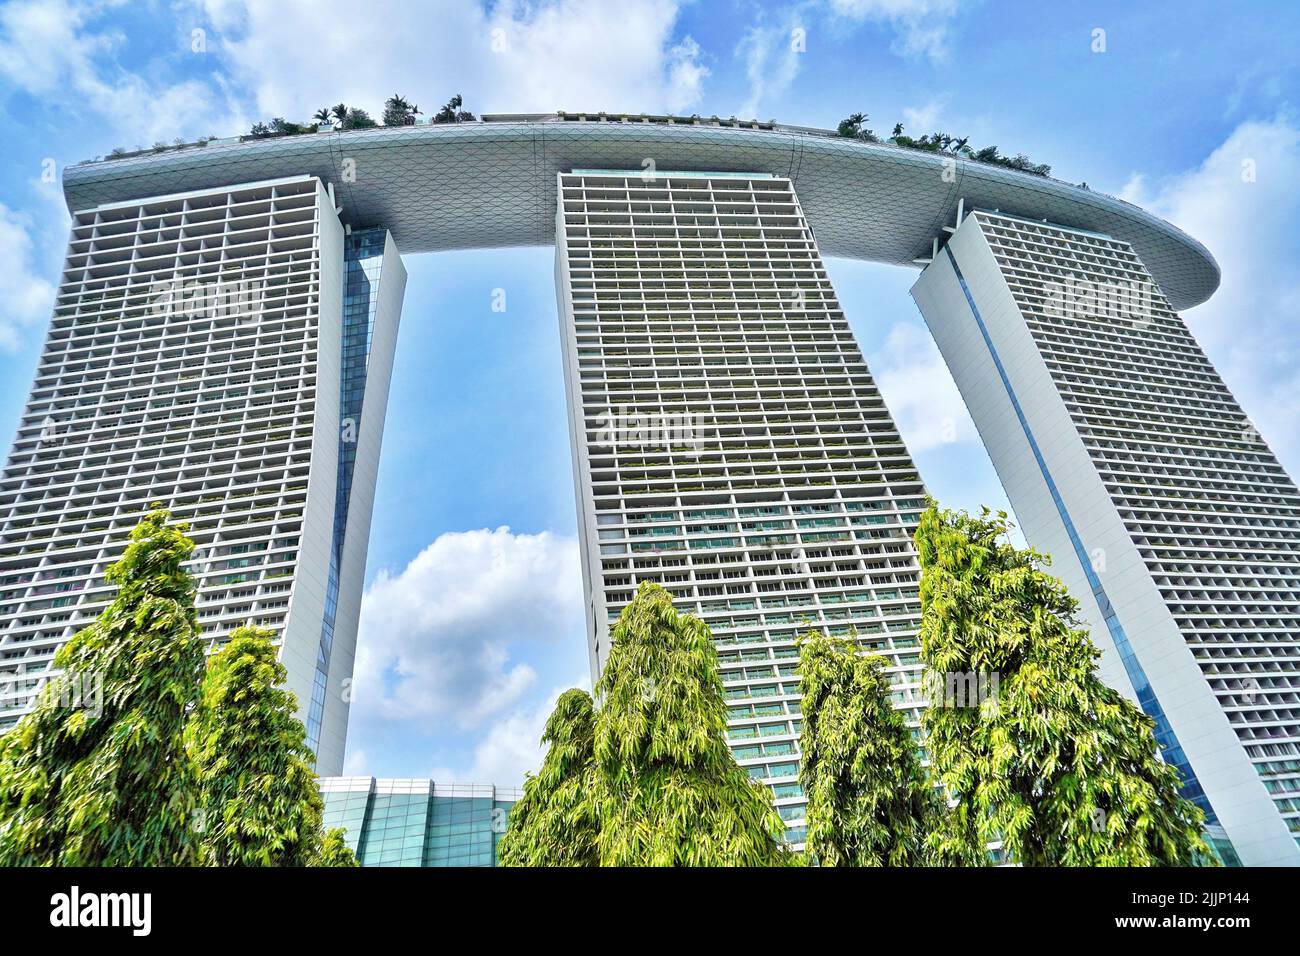 A low angle shot of the Marina Bay Sands hotel in Singapore under a cloudy sky surrounded by greenery Stock Photo